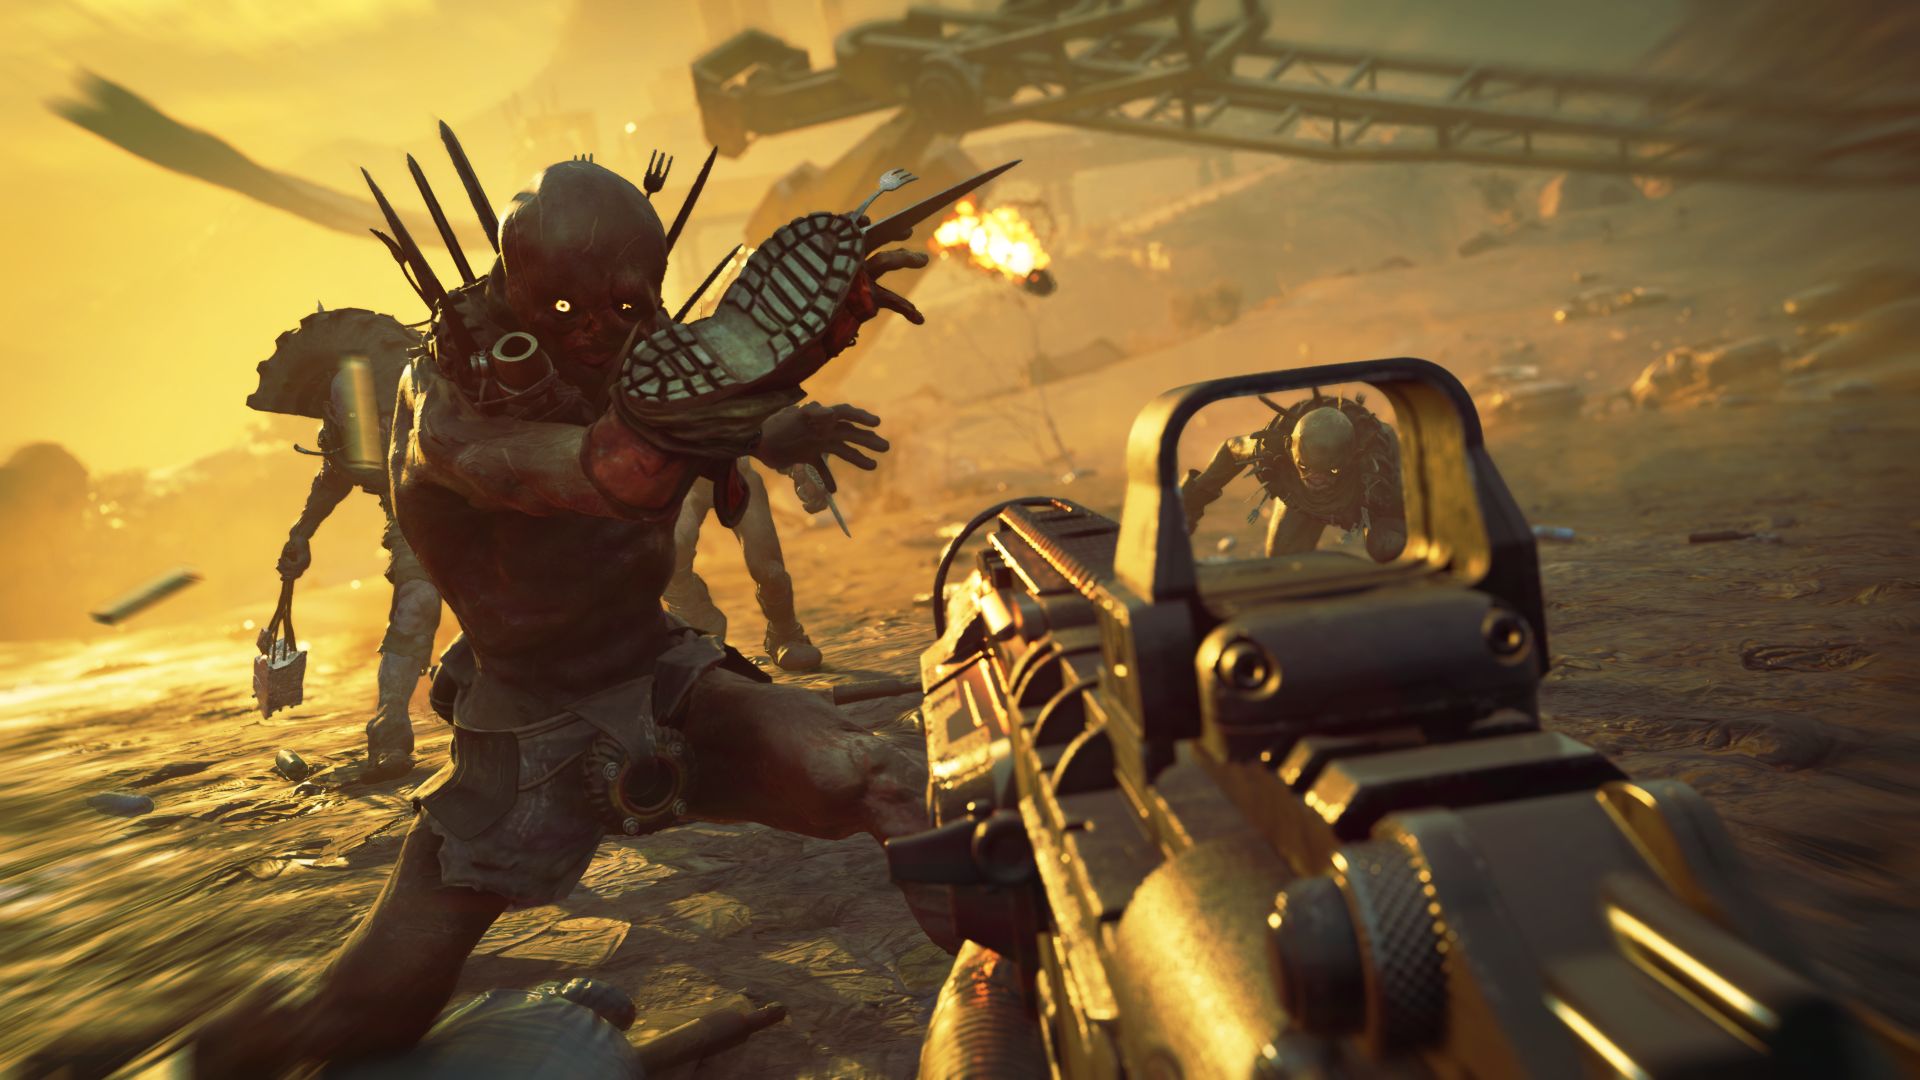 RAGE 2 released